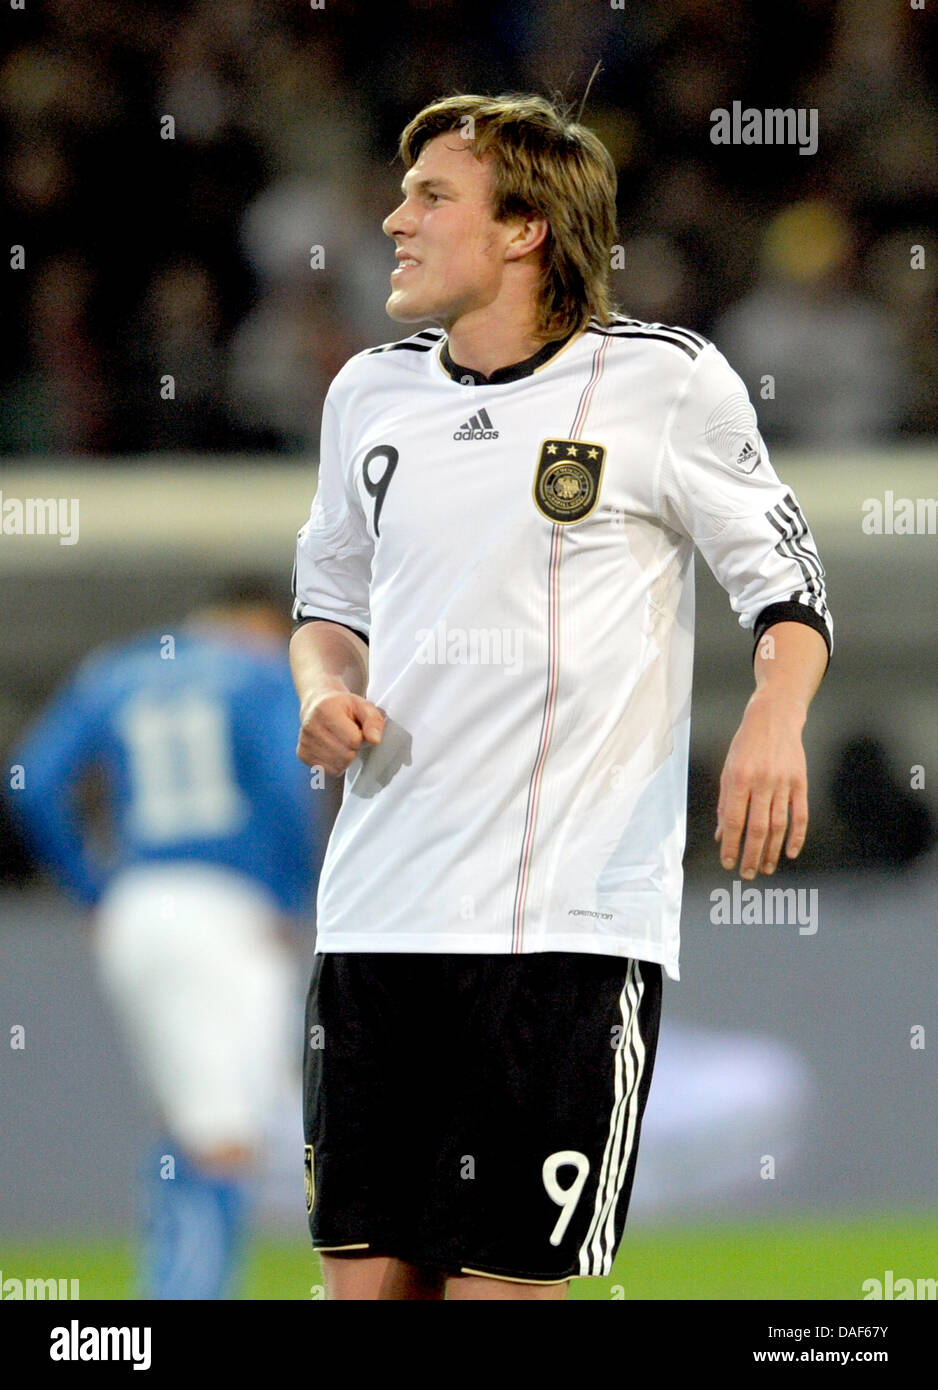 Germany's Kevin Grosskreutz reacts during the friendly soccer match between Germany and Italy at Signal Iduna Park stadium in Dortmund, Germany, 09 February 2011. Photo: Federico Gambarini Stock Photo